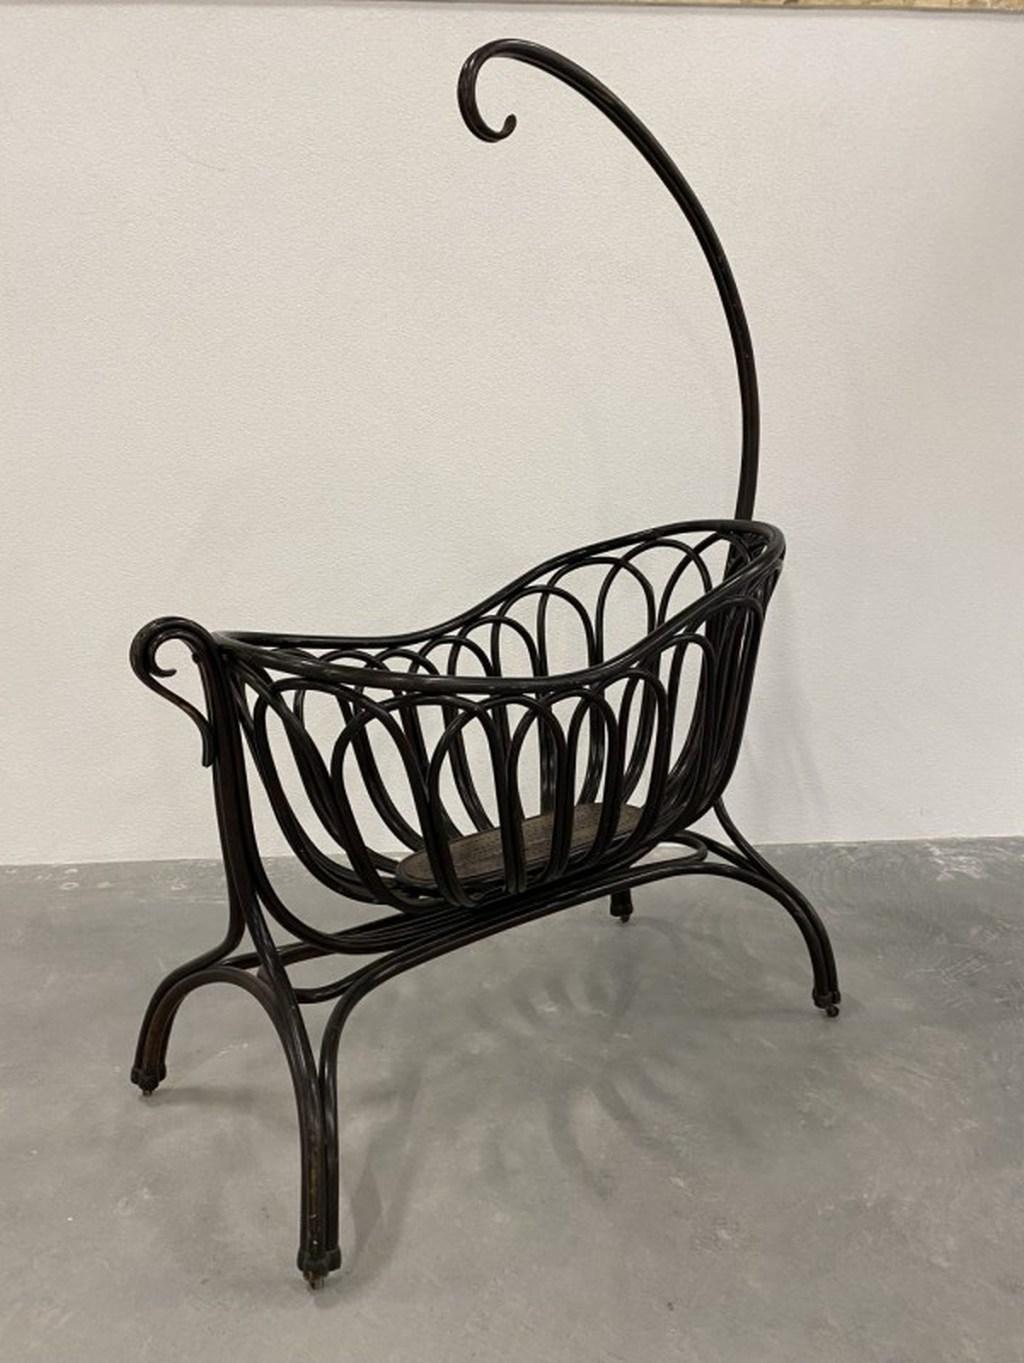 This French bentwood cradle made by Thonet circa late 1900s. The cradle is in very good working order.